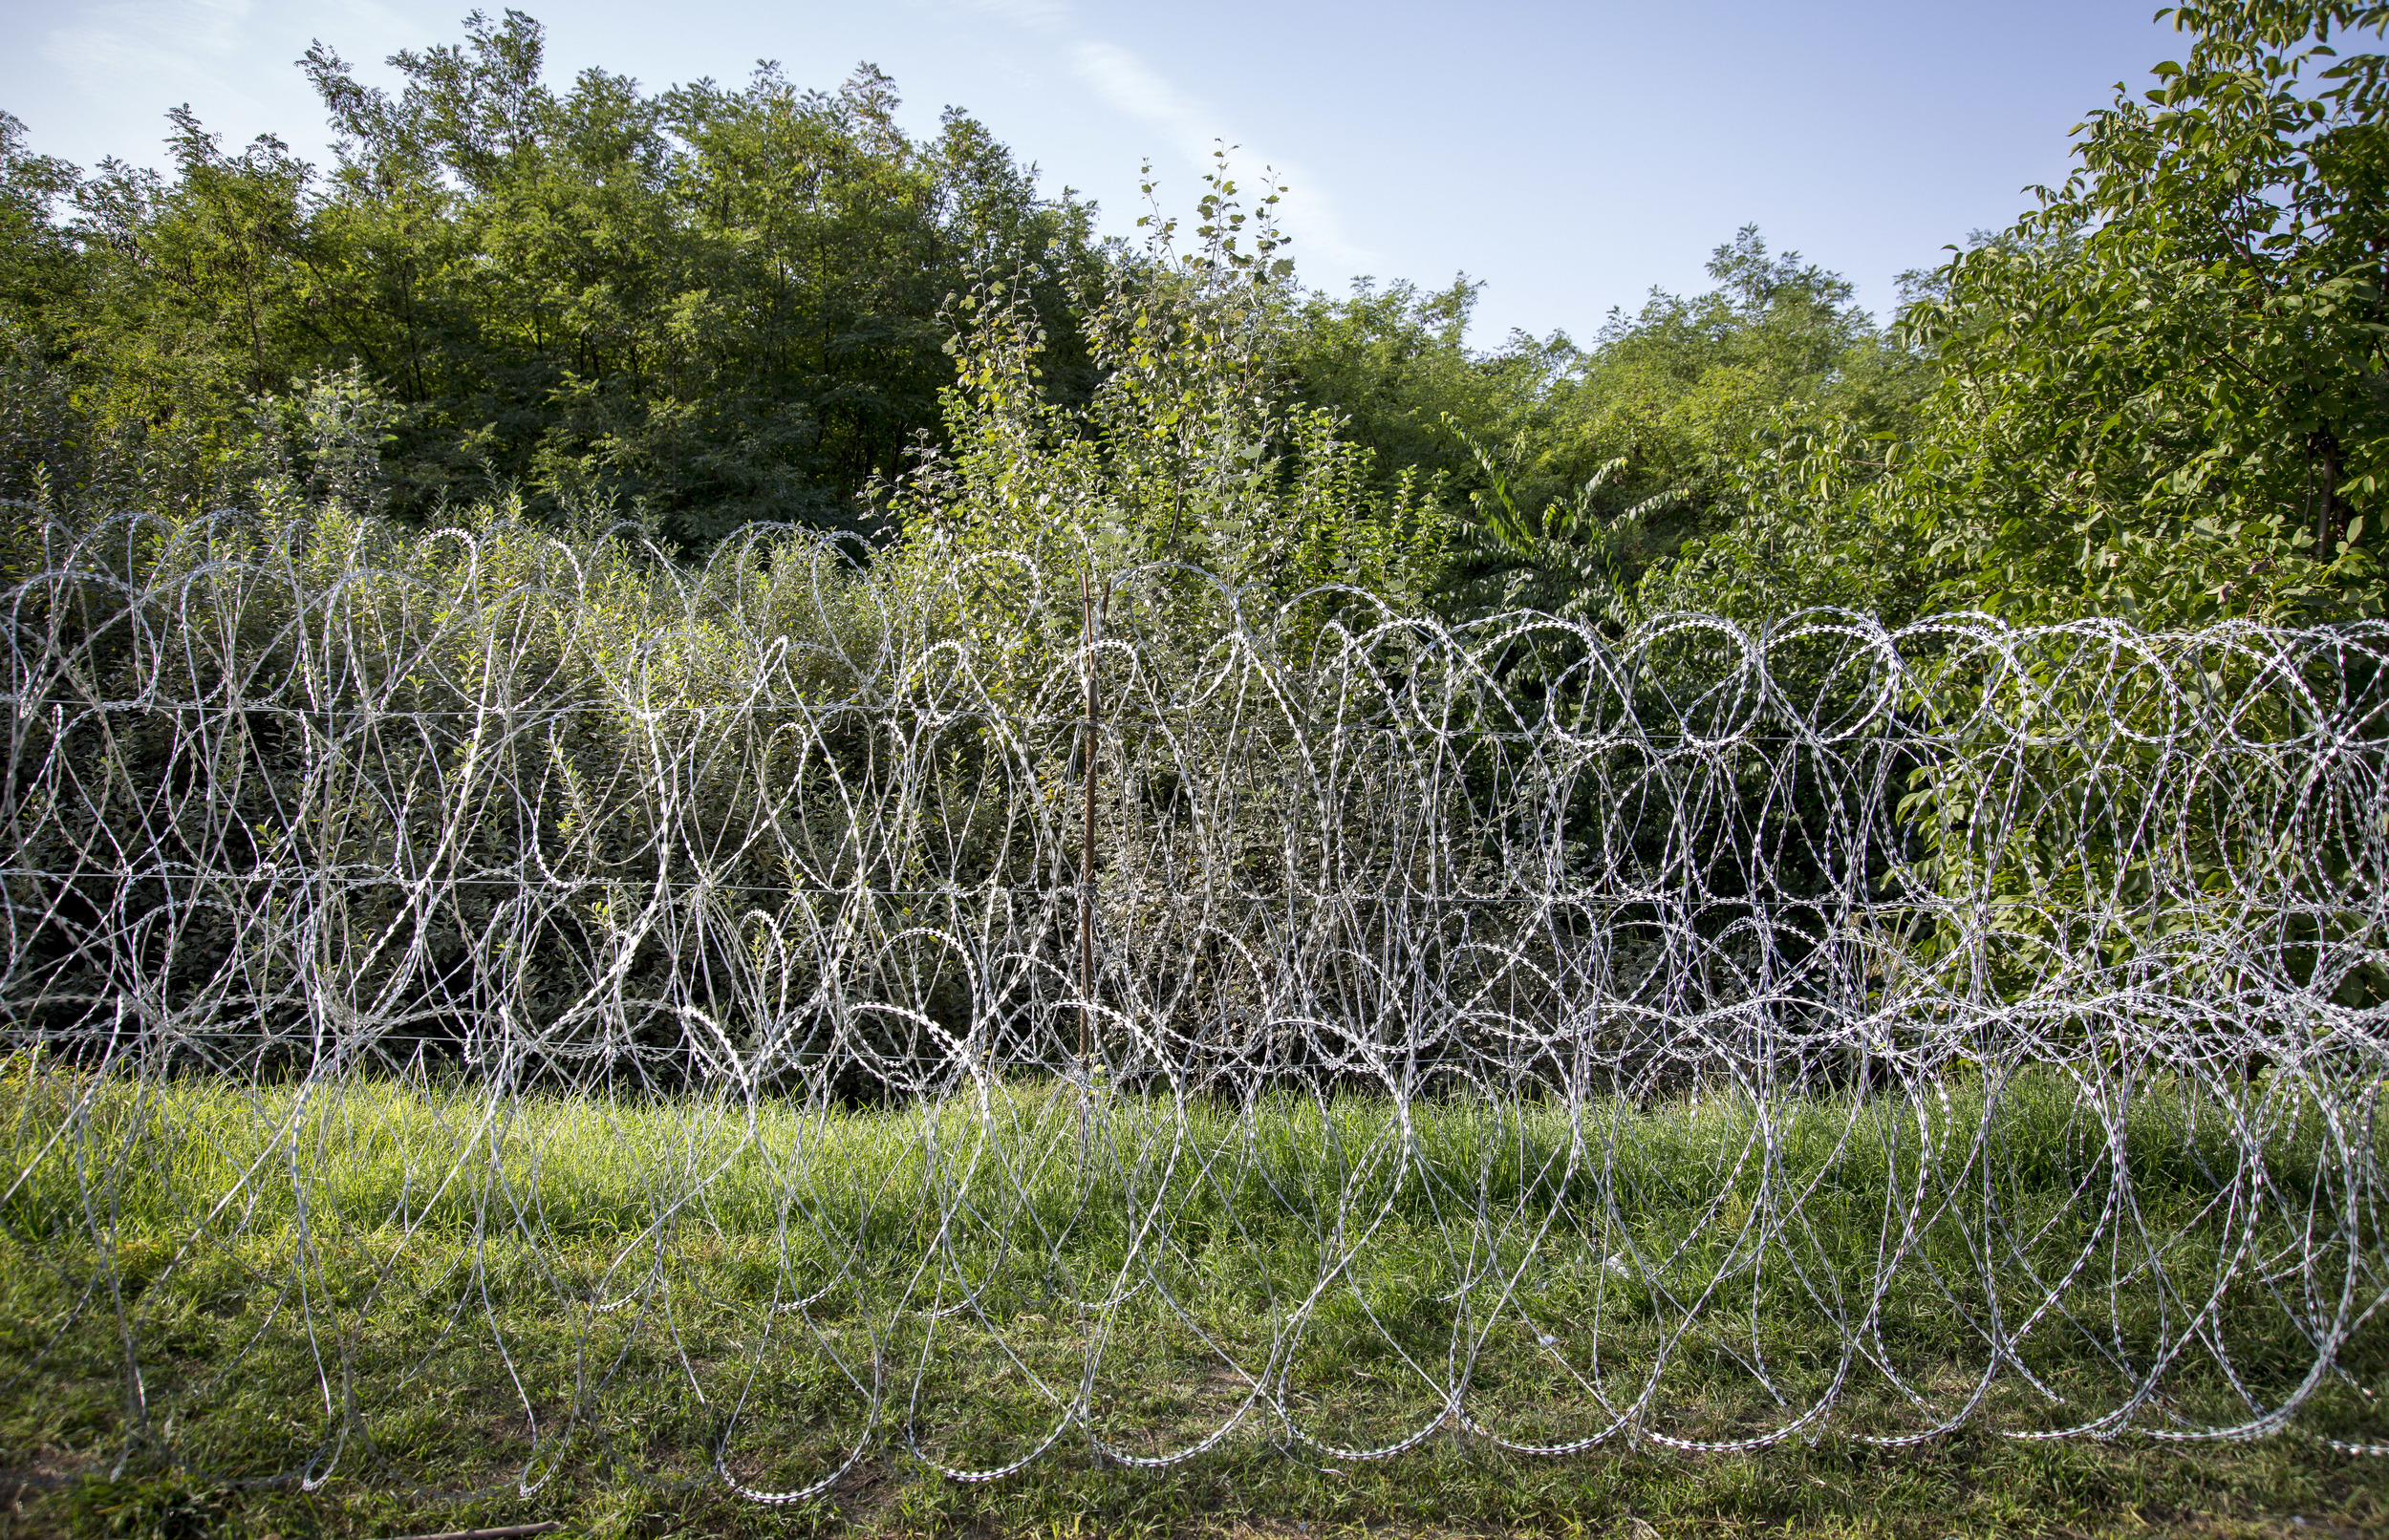   Closer to the official border crossing is only used barbed wire to keep refugees out.  